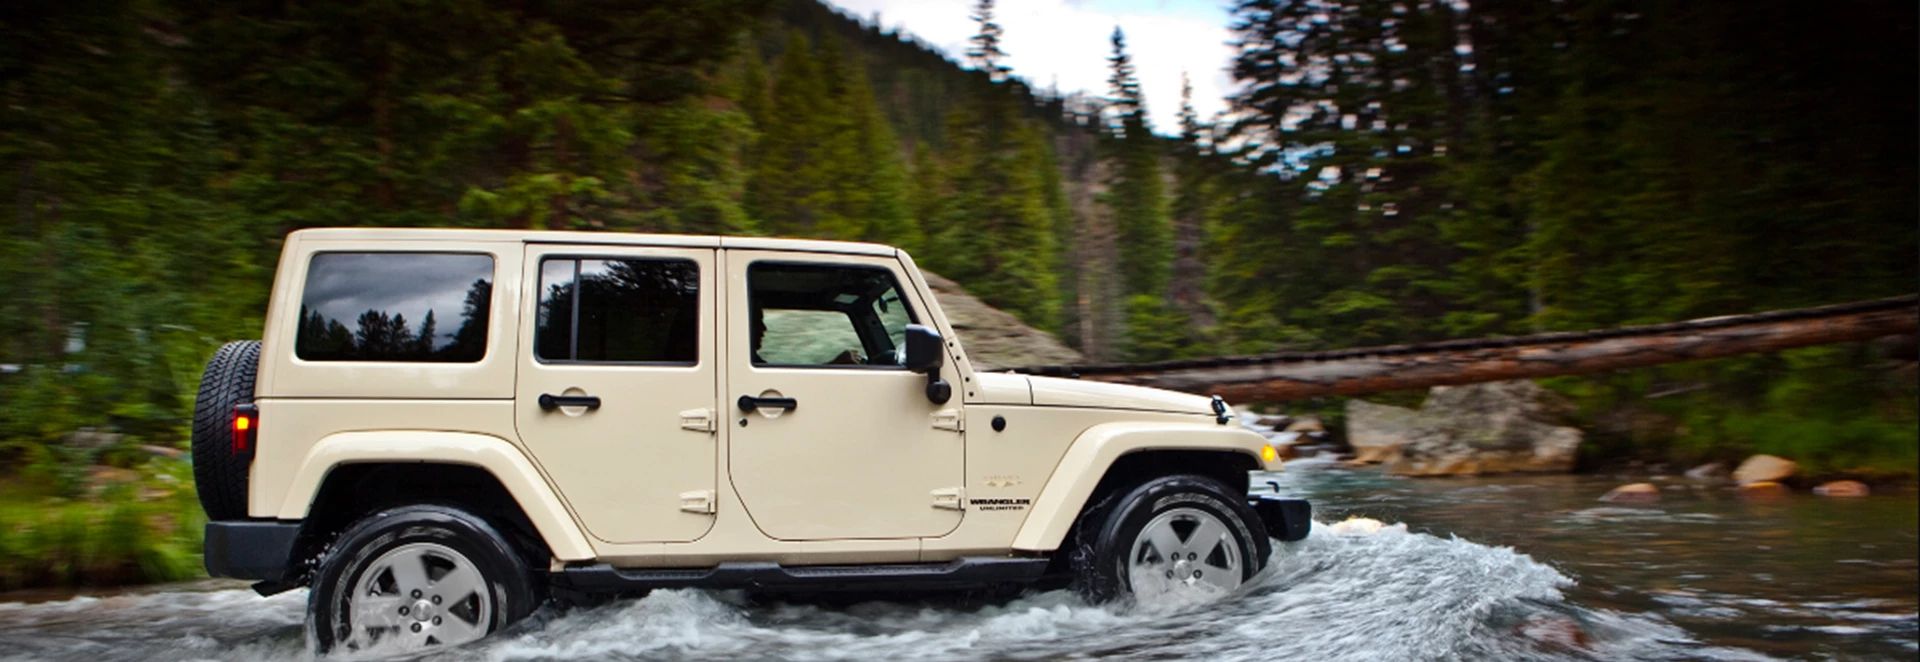 2017 Jeep Wrangler will have better fuel economy 